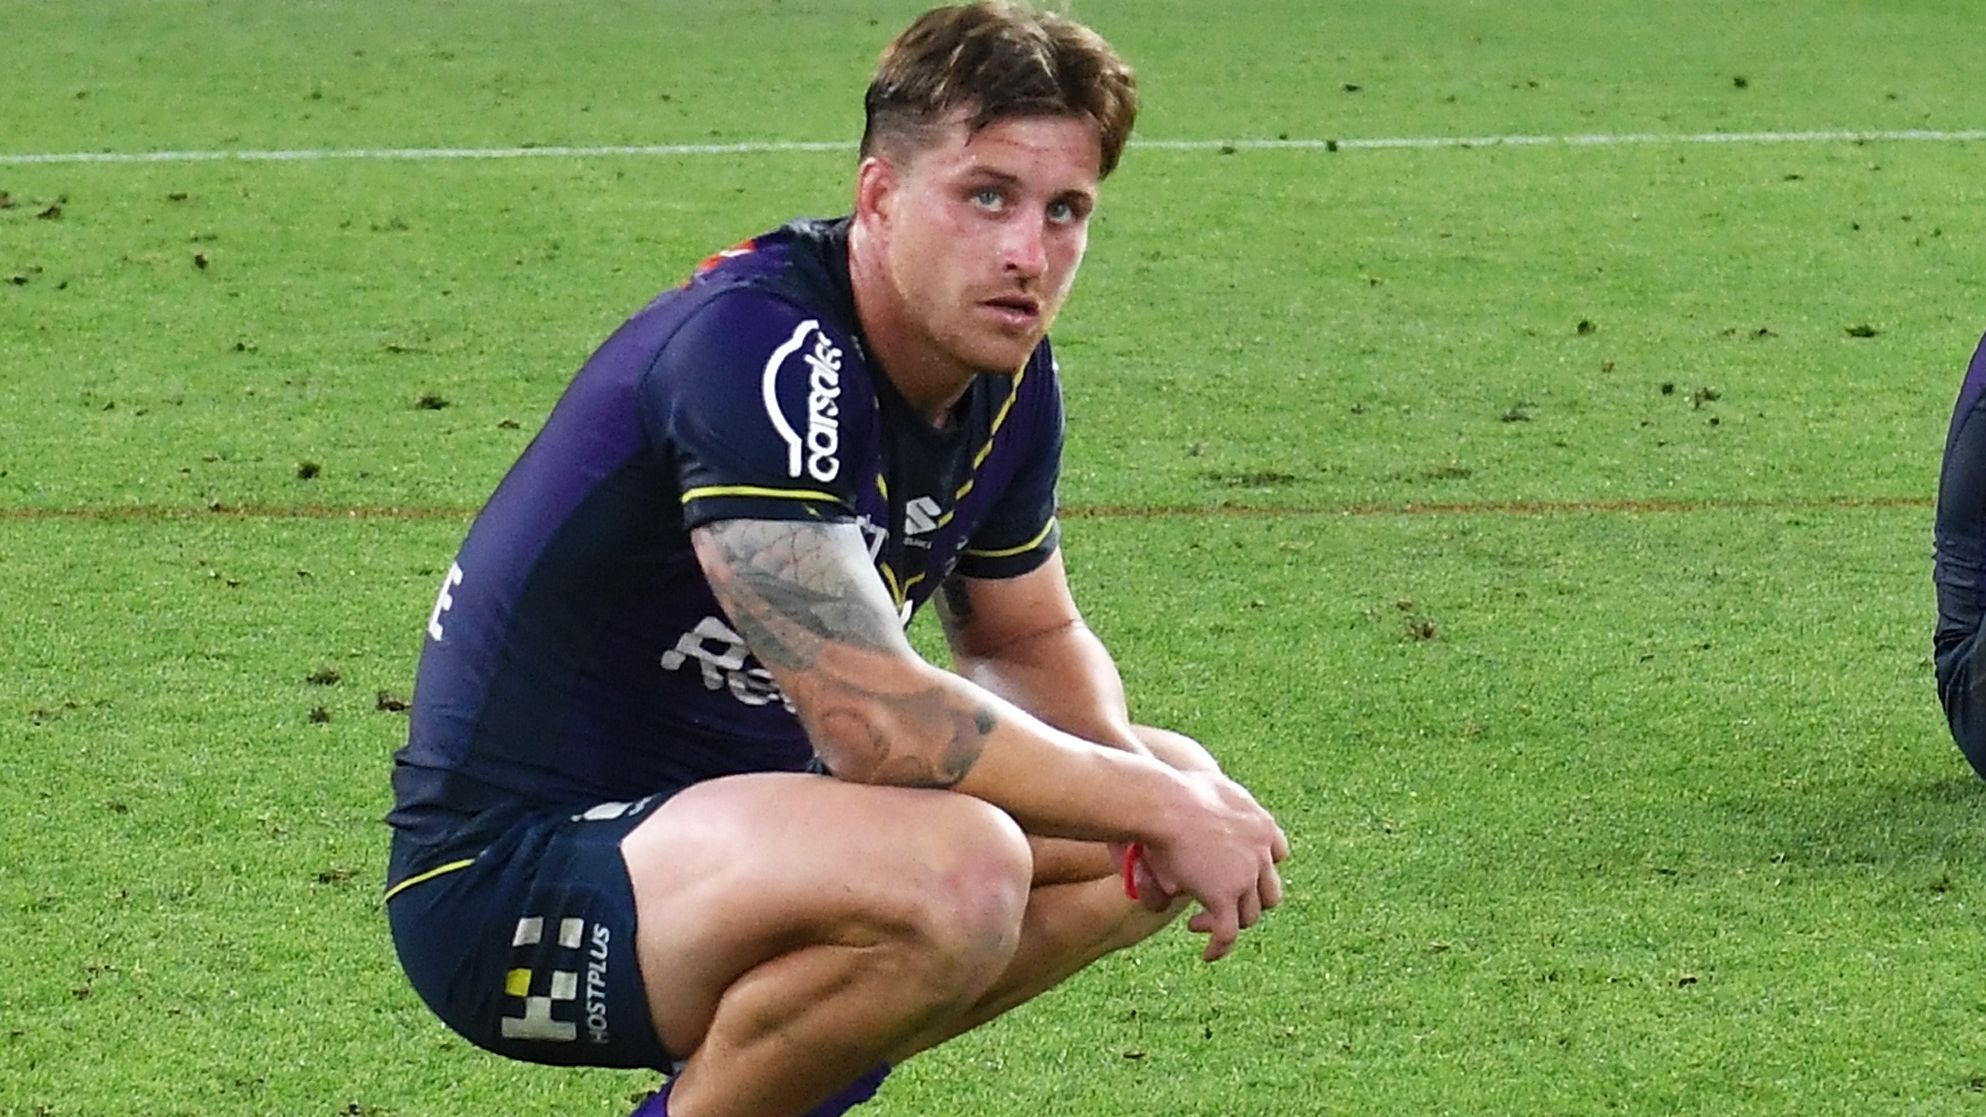 Cameron Munster has been identified as one of the players in the video.